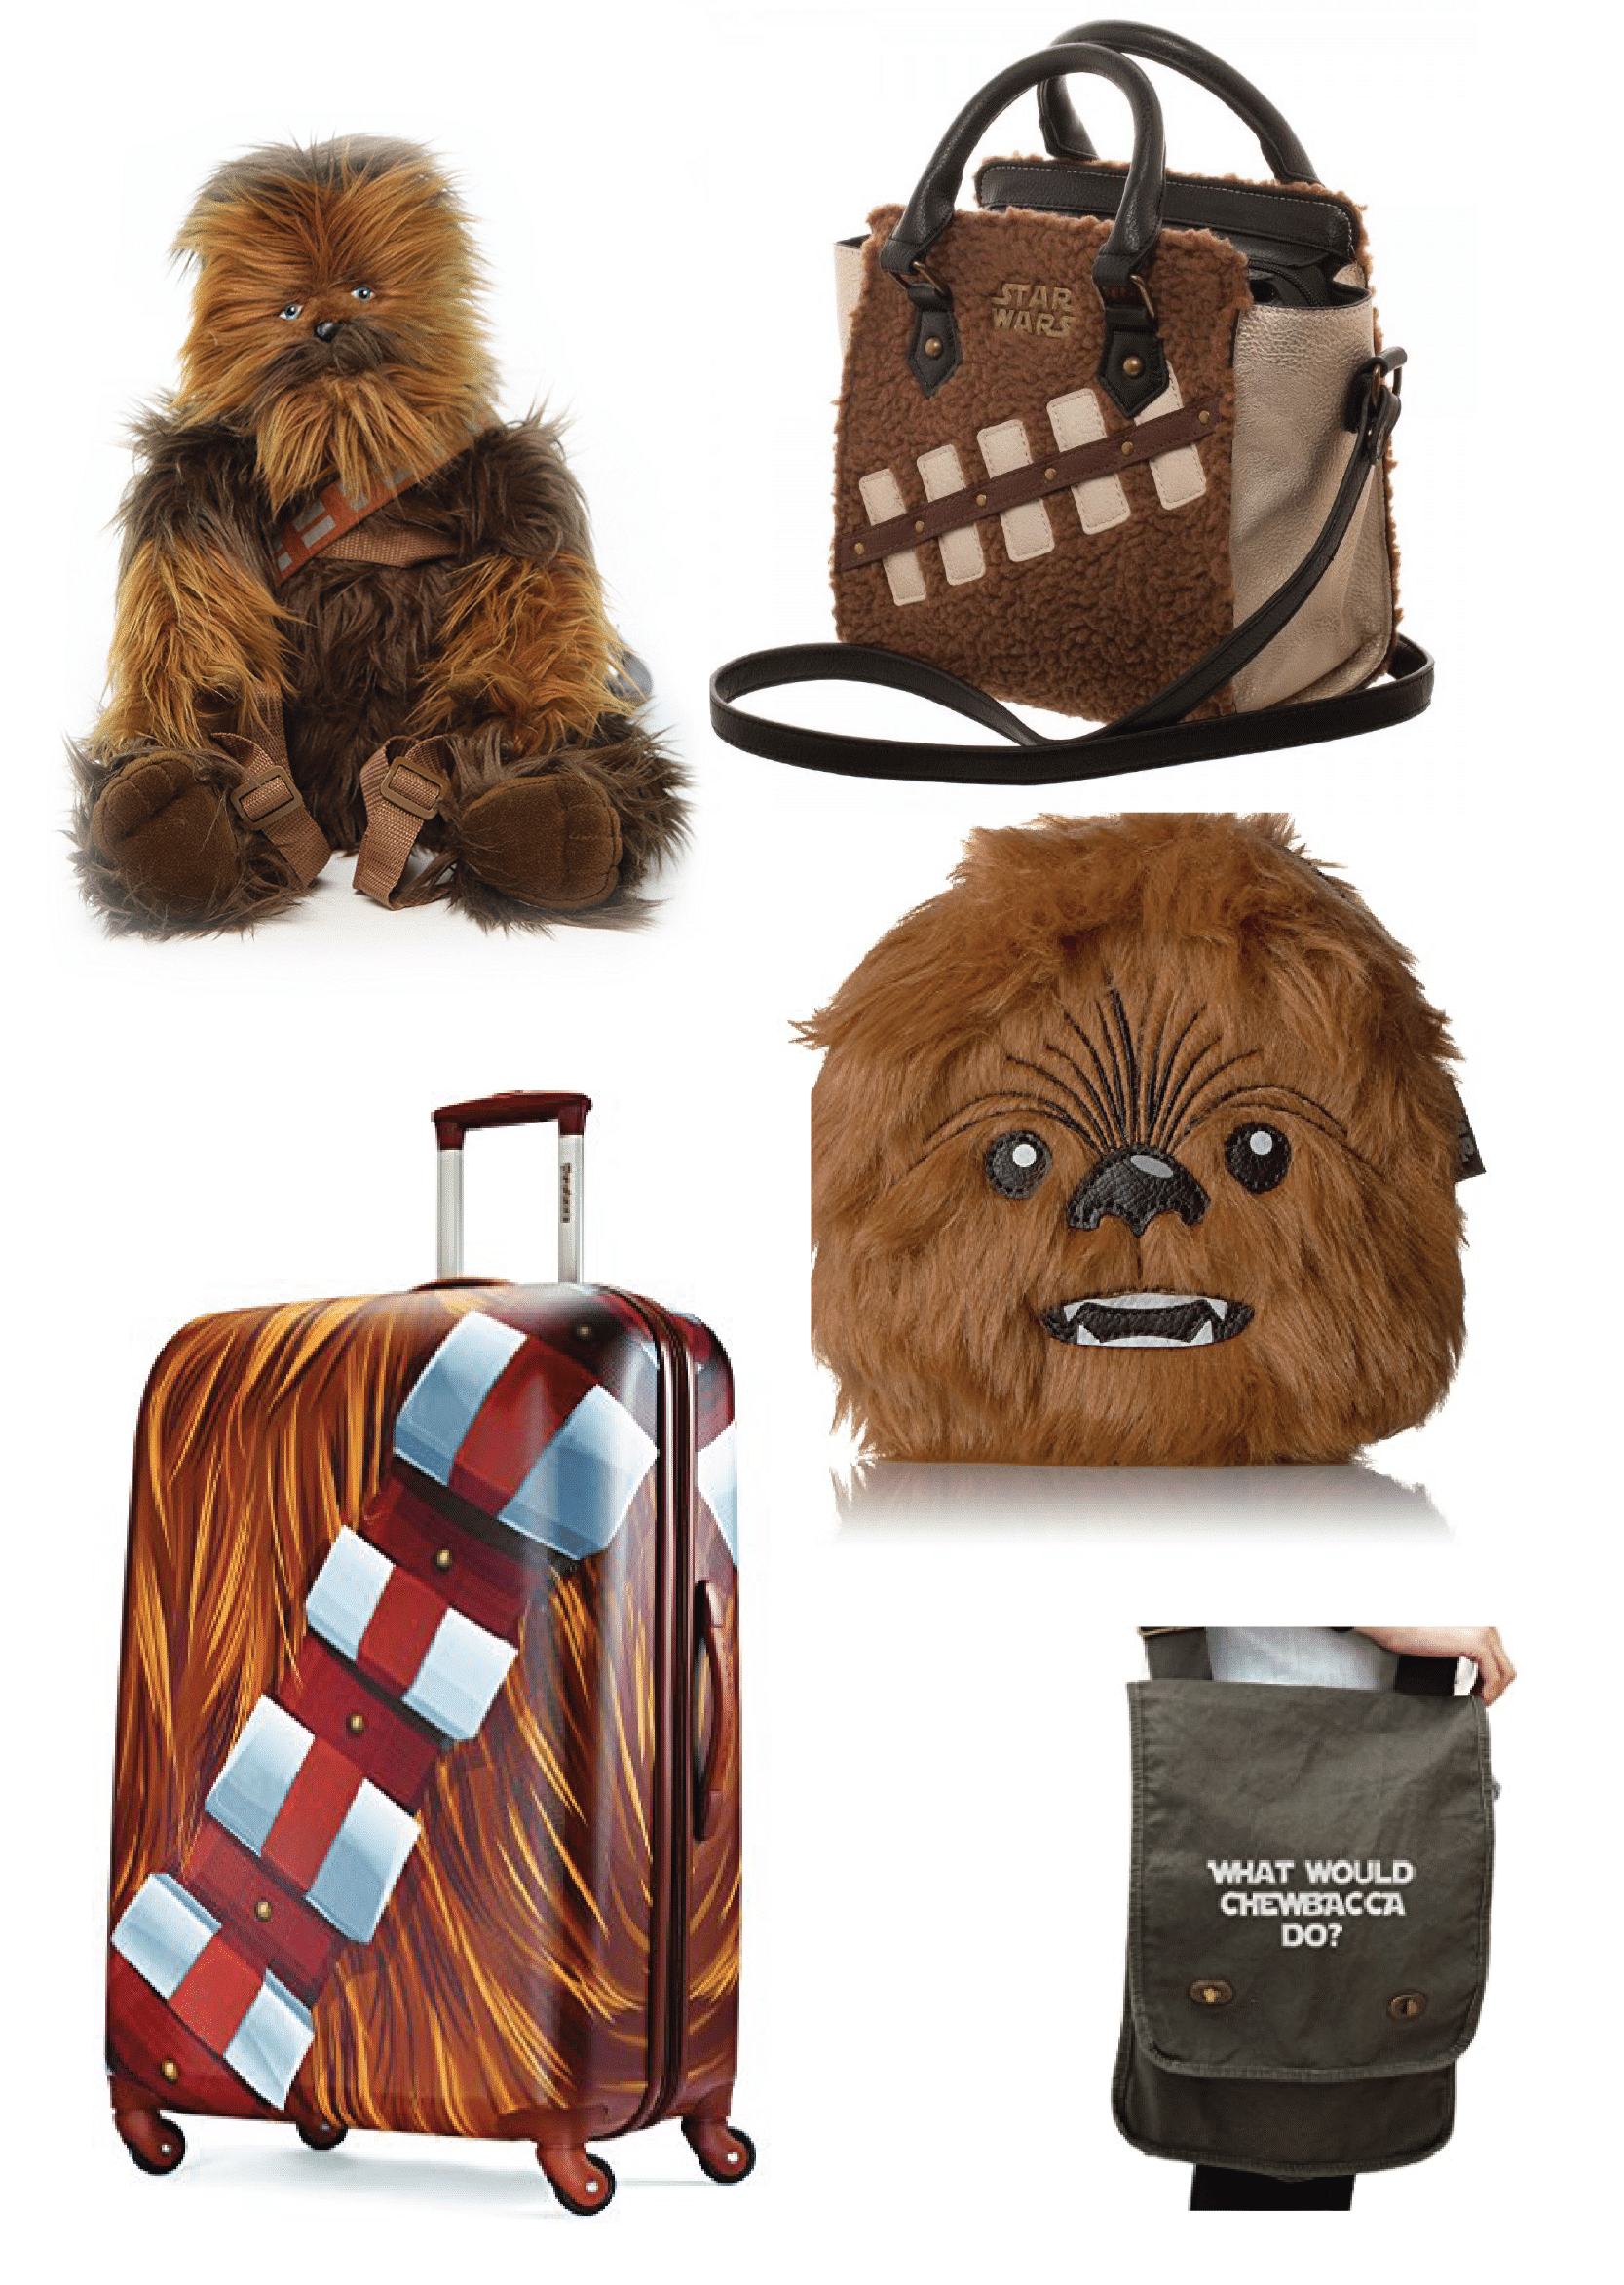 Need Star Wars gift to bring to a party? These Chewbacca inspired products are some of the best birthday gifts, Star Wars clothes, or really just products for people who loved The Last Jedi